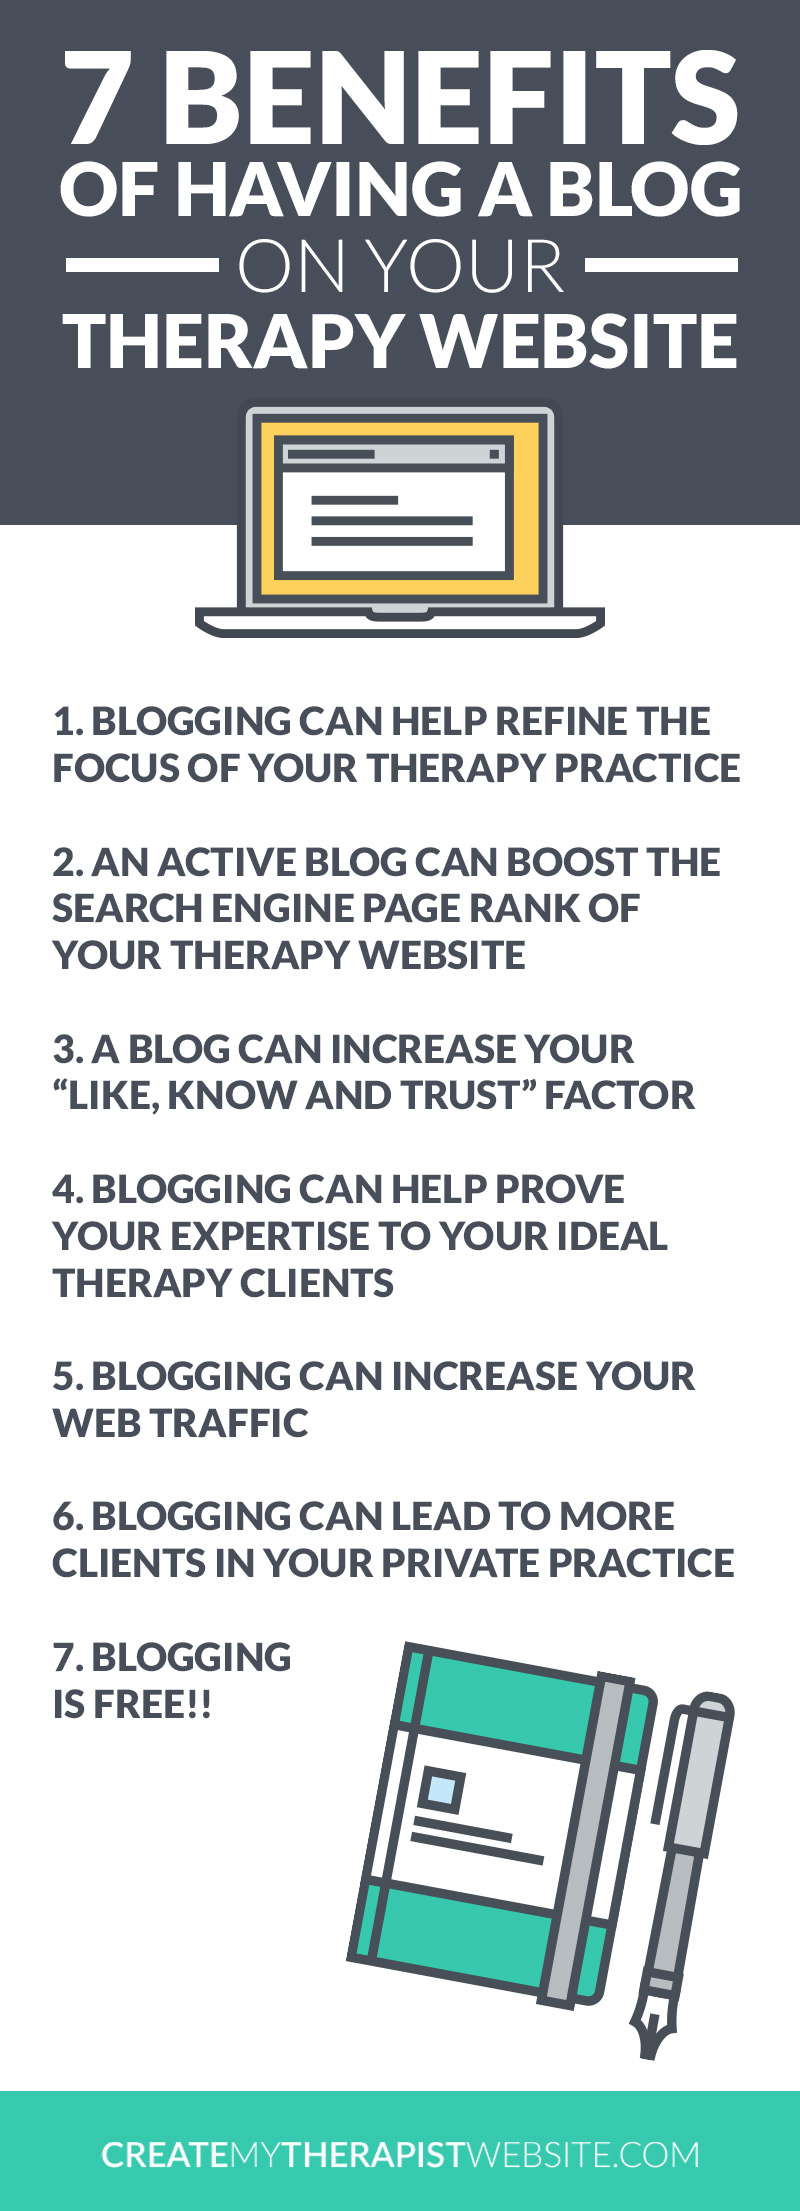 With all the talk out there about “content marketing” and blogging, it’s really important to know if starting a private practice blog is right for you and your website. In this post we’ll talk about the benefits of blogging and determine if this marketing strategy is right for you and your therapy practice.